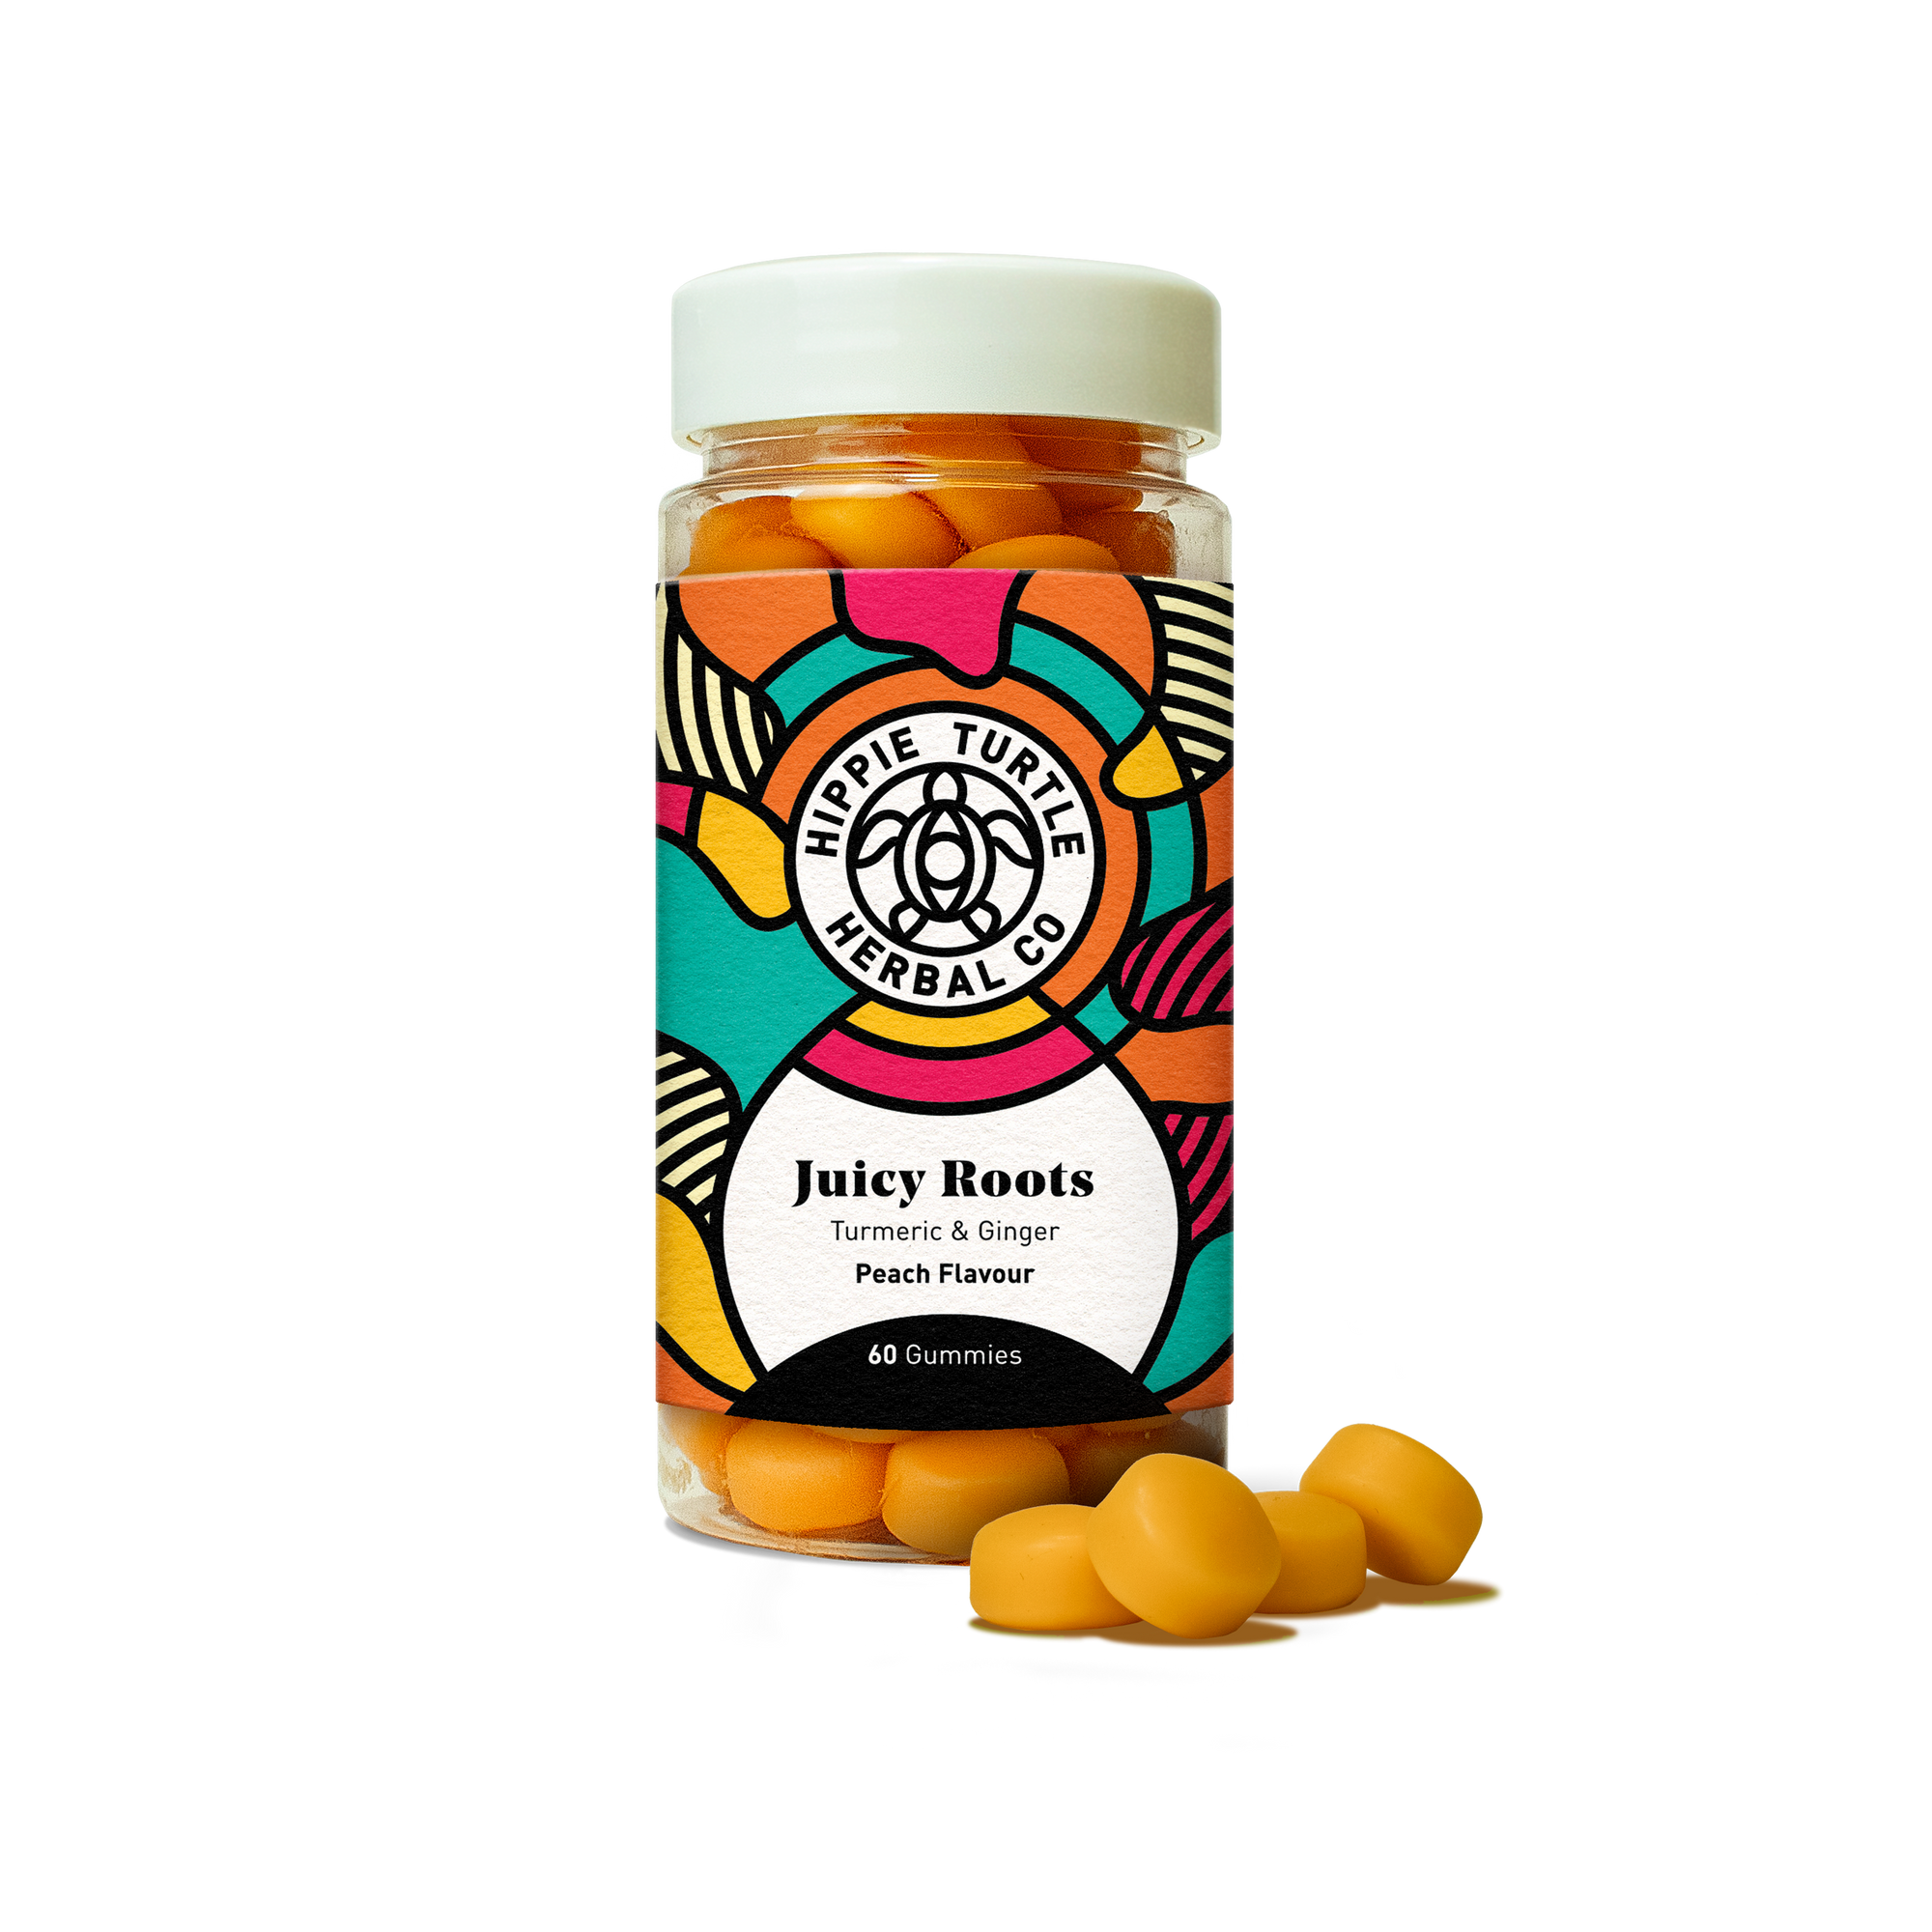 Hippie Turtle Herbal Co Juicy Roots turmeric and ginger supplement gummies to help digestion and joint pain